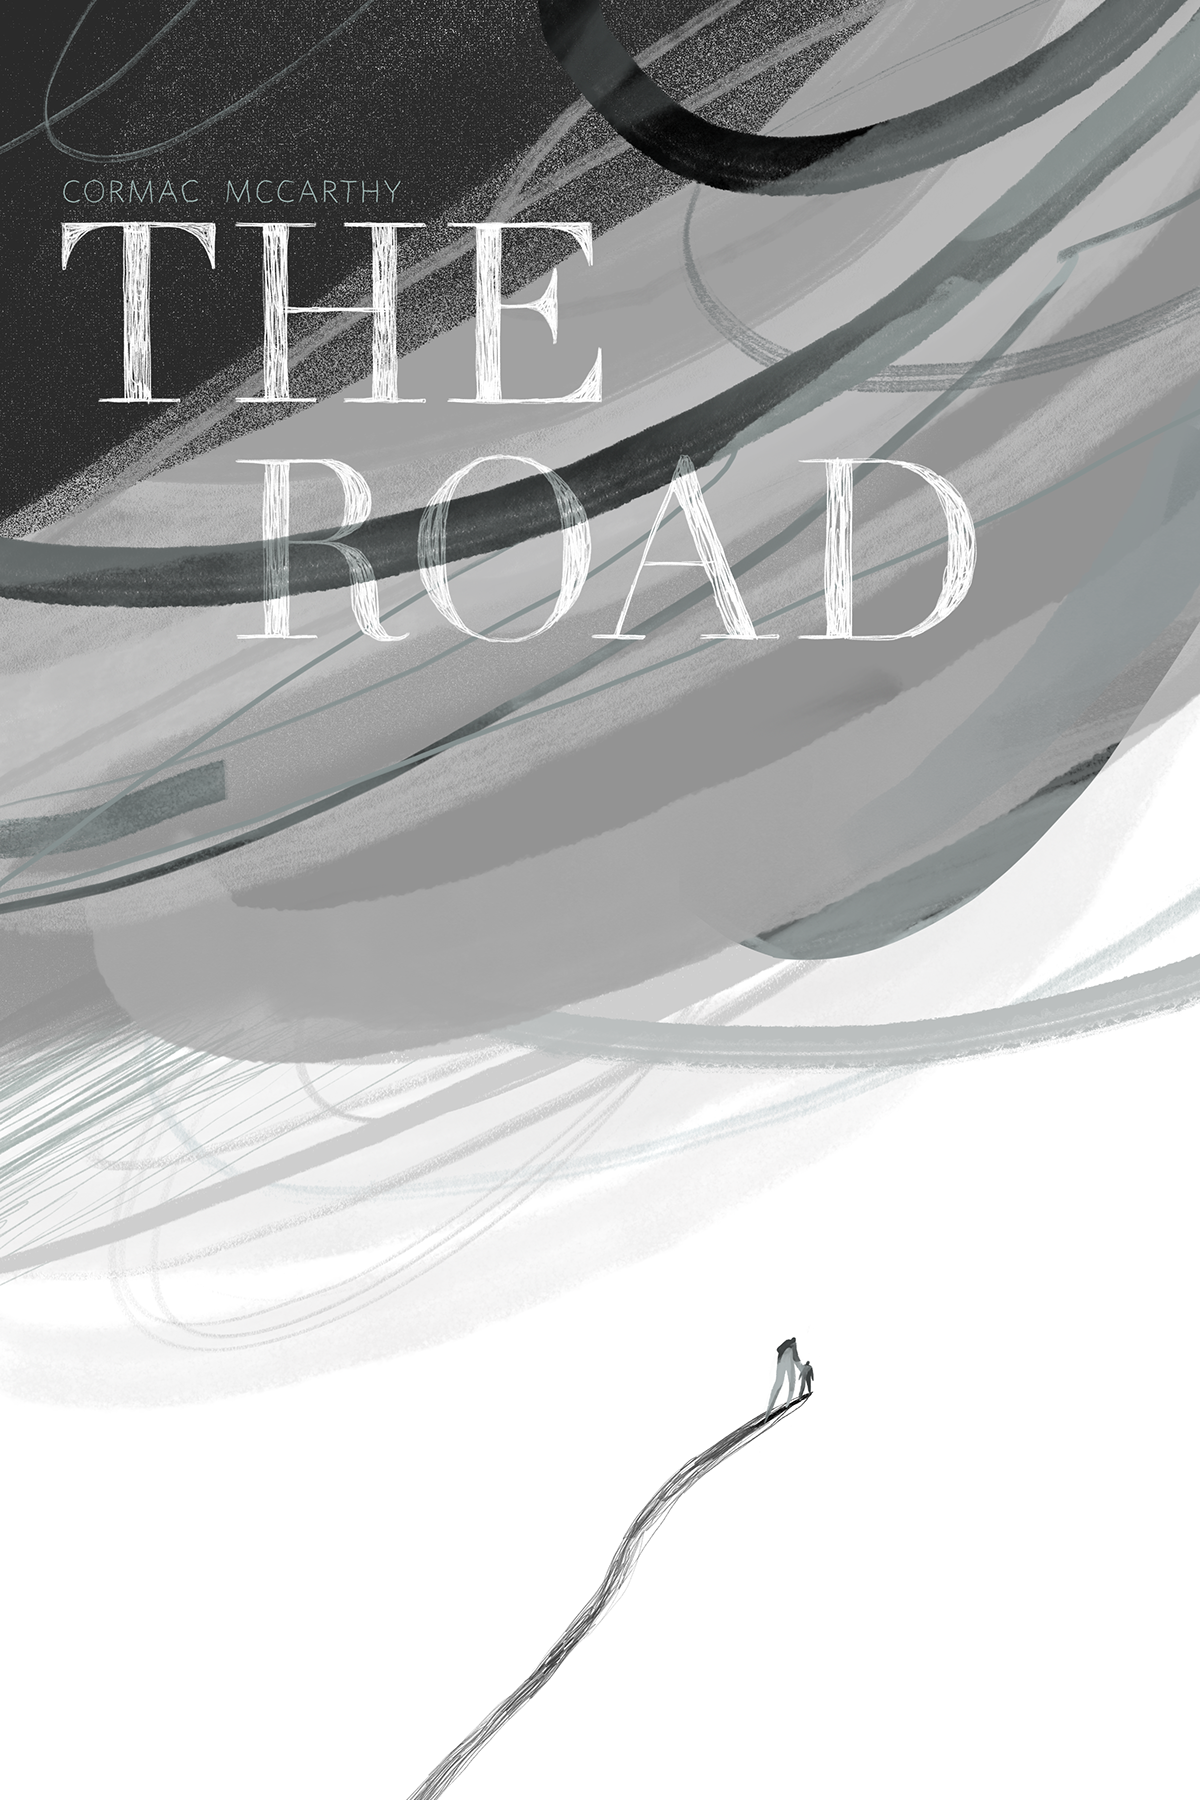 Cormac McCarthy book cover ILLUSTRATION  the road